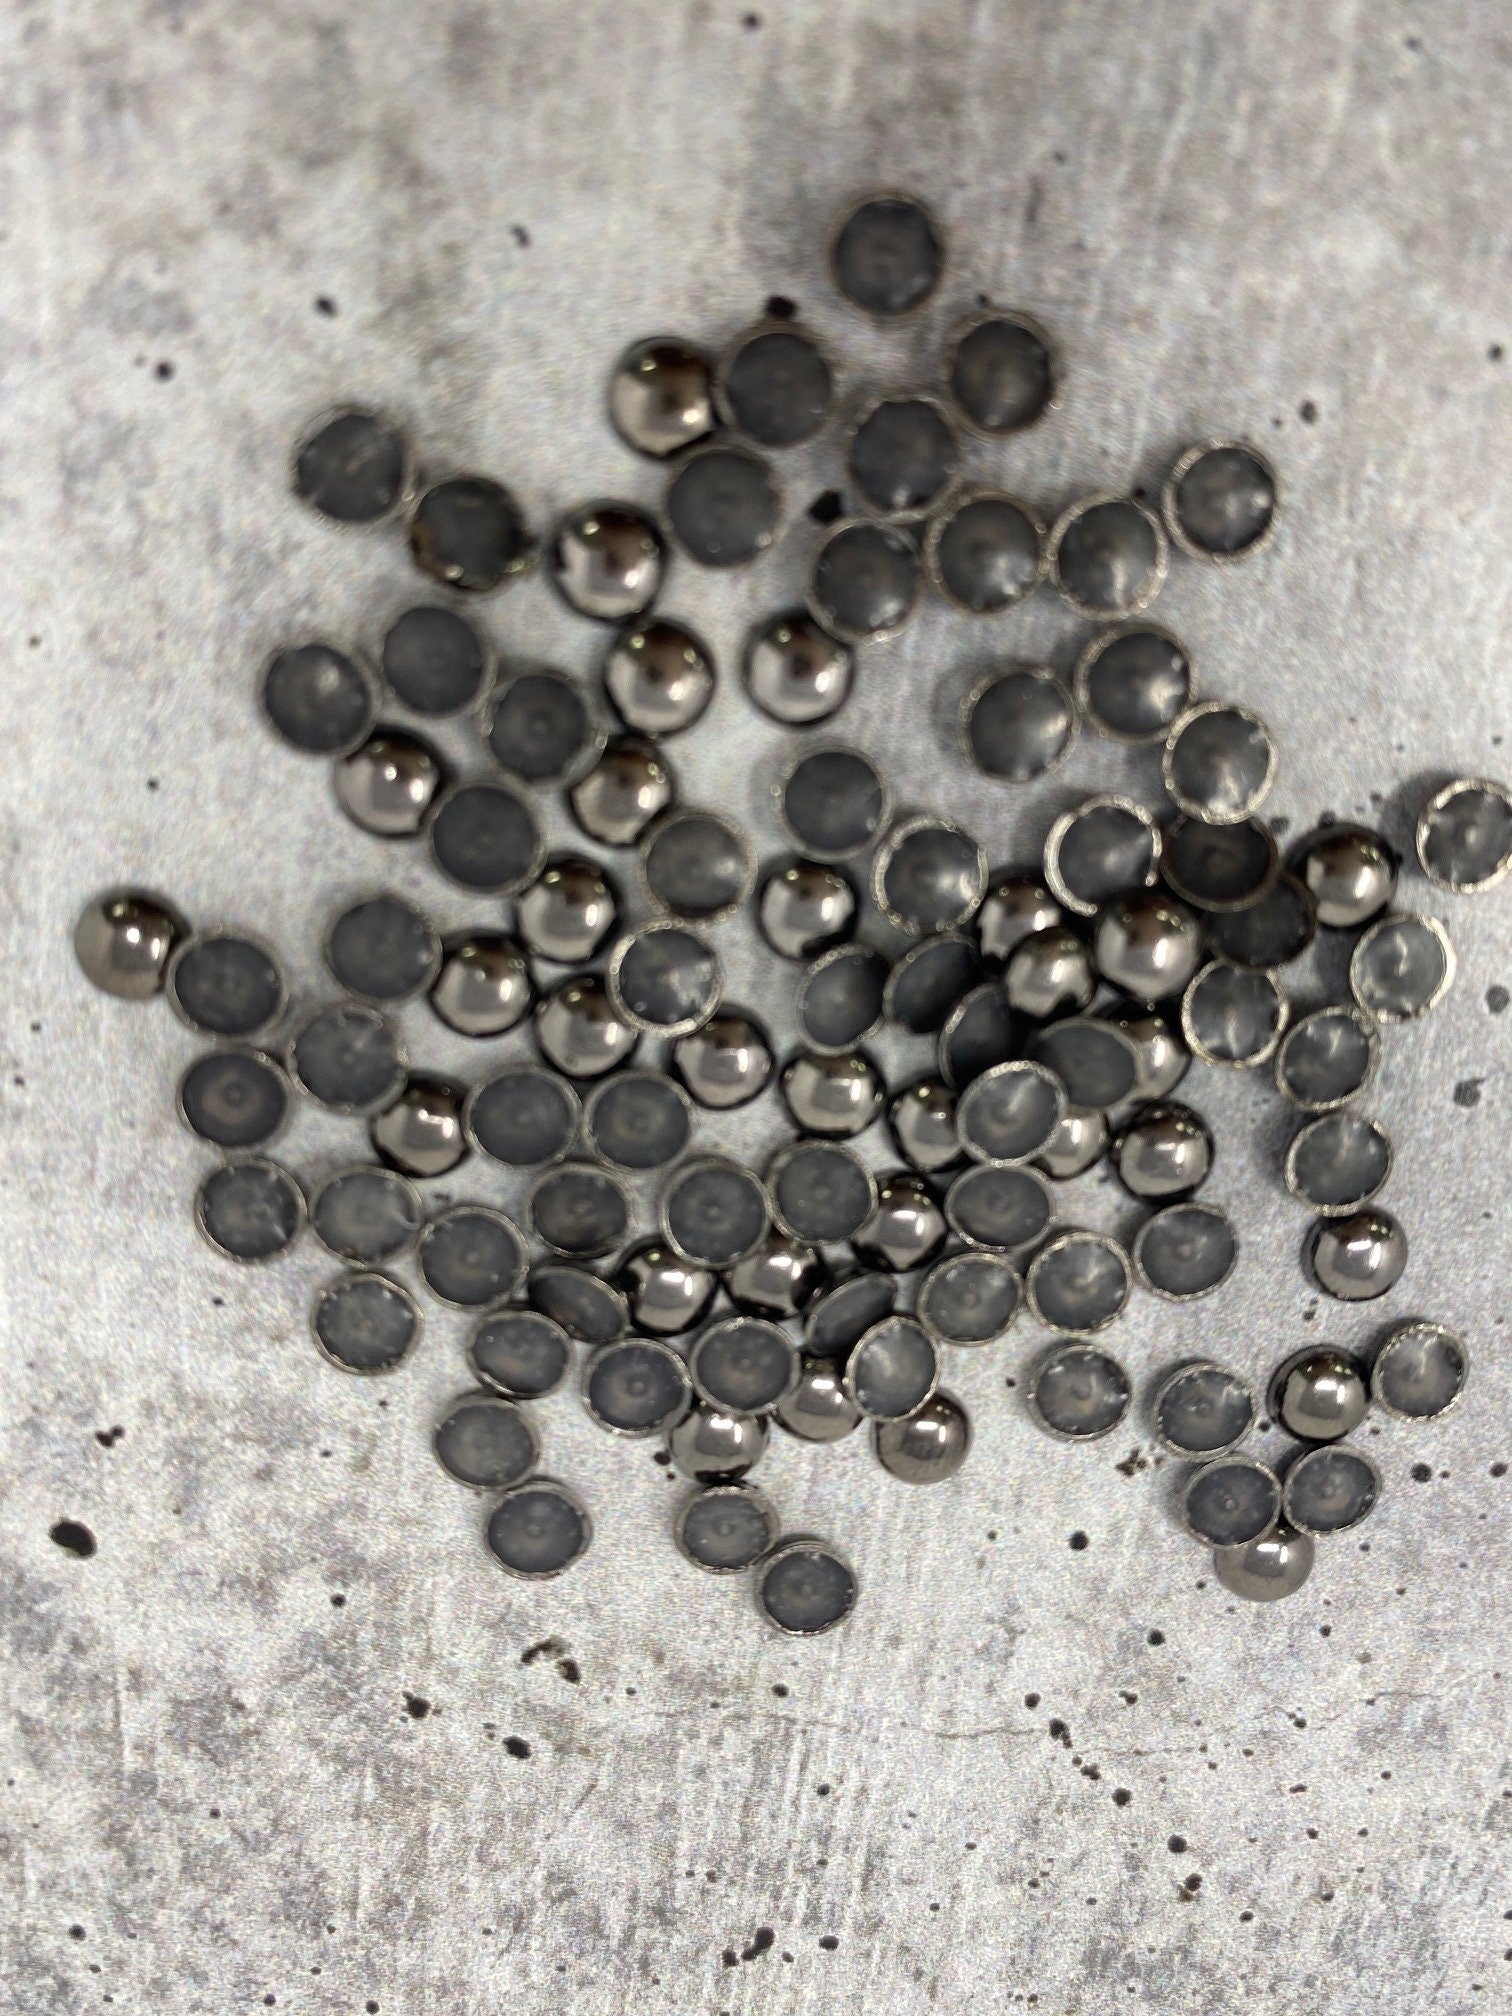 NEW, Hotfix Dome Studs, 100 Pcs, 5mm (XSmall) CHROME, Great for Denim, Sweaters, Camo Jackets, Belts, Bags, Shoes, Crafts,+ MORE!